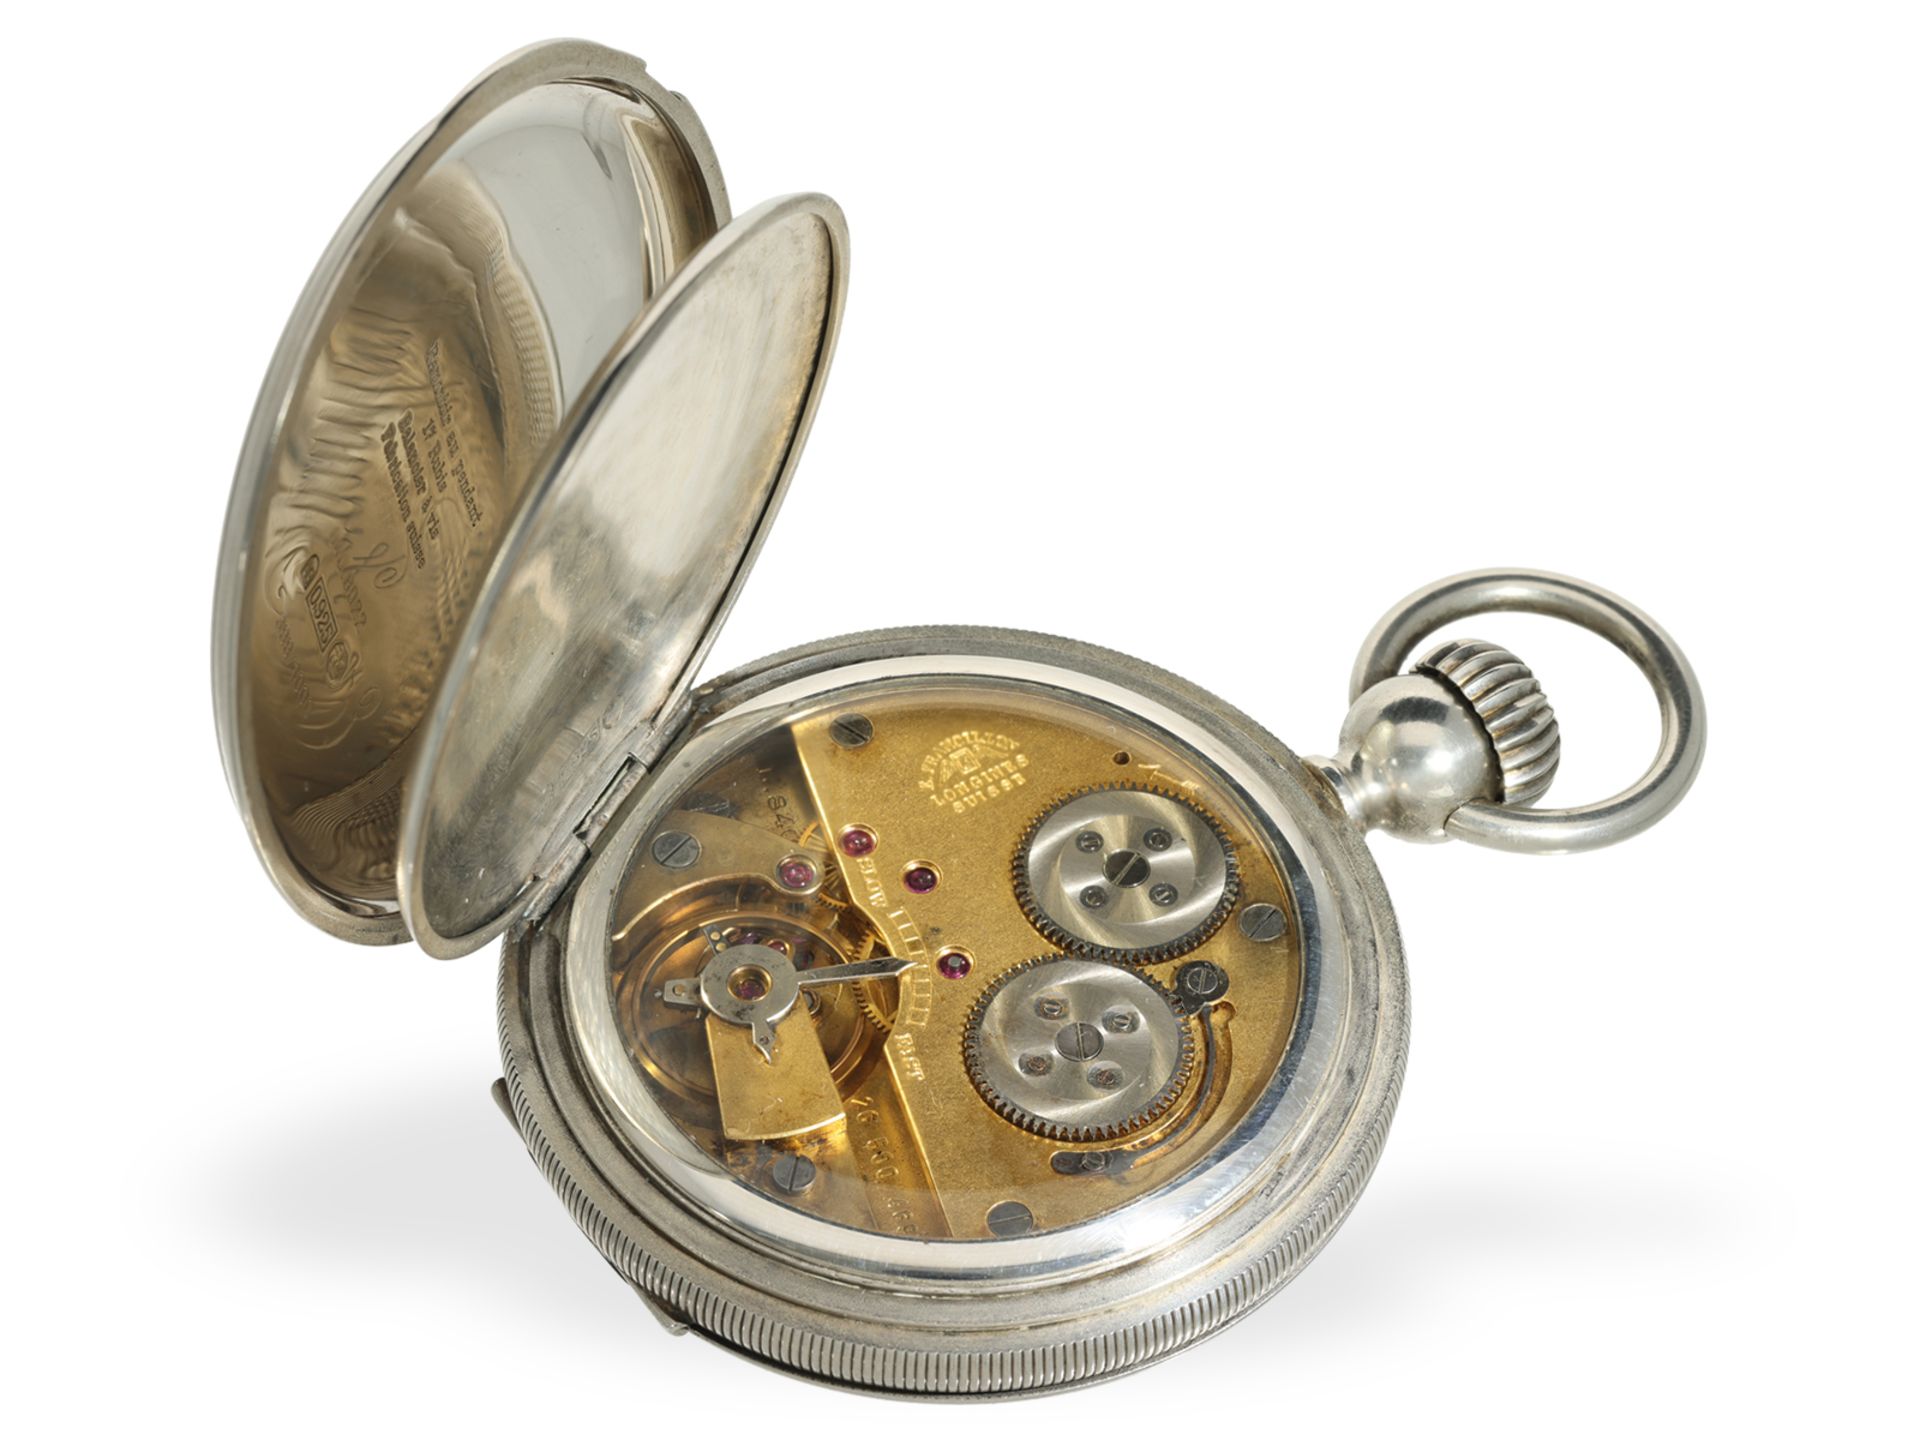 Pocket watch: rare, limited Longines Ernest Francillon 125th "1867" Ref. 840.8022, 399/1000 - Image 5 of 7